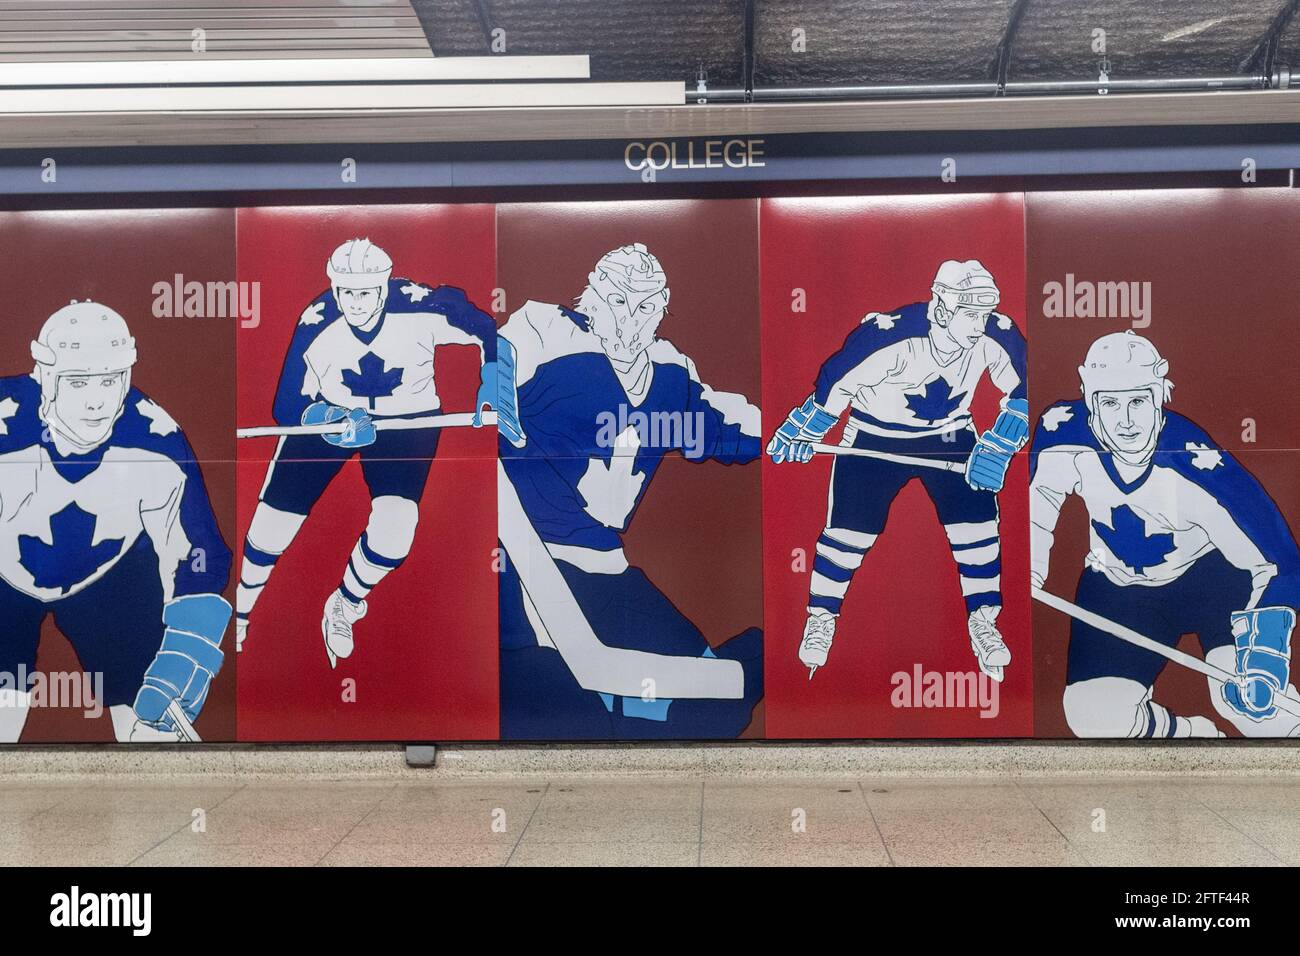 TTC Public Art Program. Maple Leaf Hockey themed urban art in College Subway Station in Toronto, Canada. TTC stands for Toronto Transit Commission Stock Photo